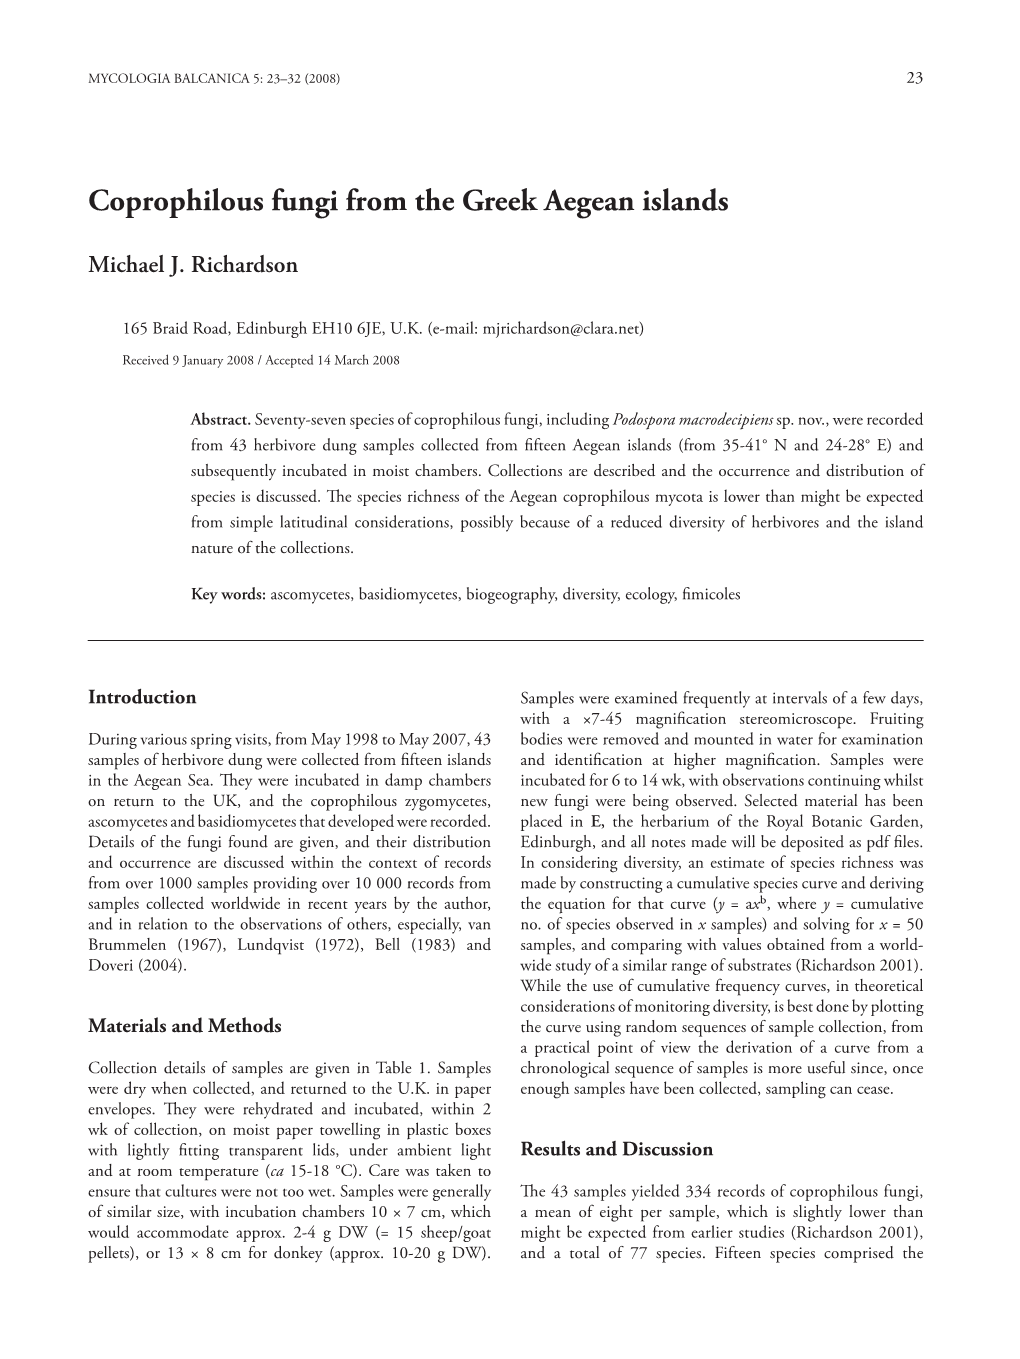 Coprophilous Fungi from the Greek Aegean Islands